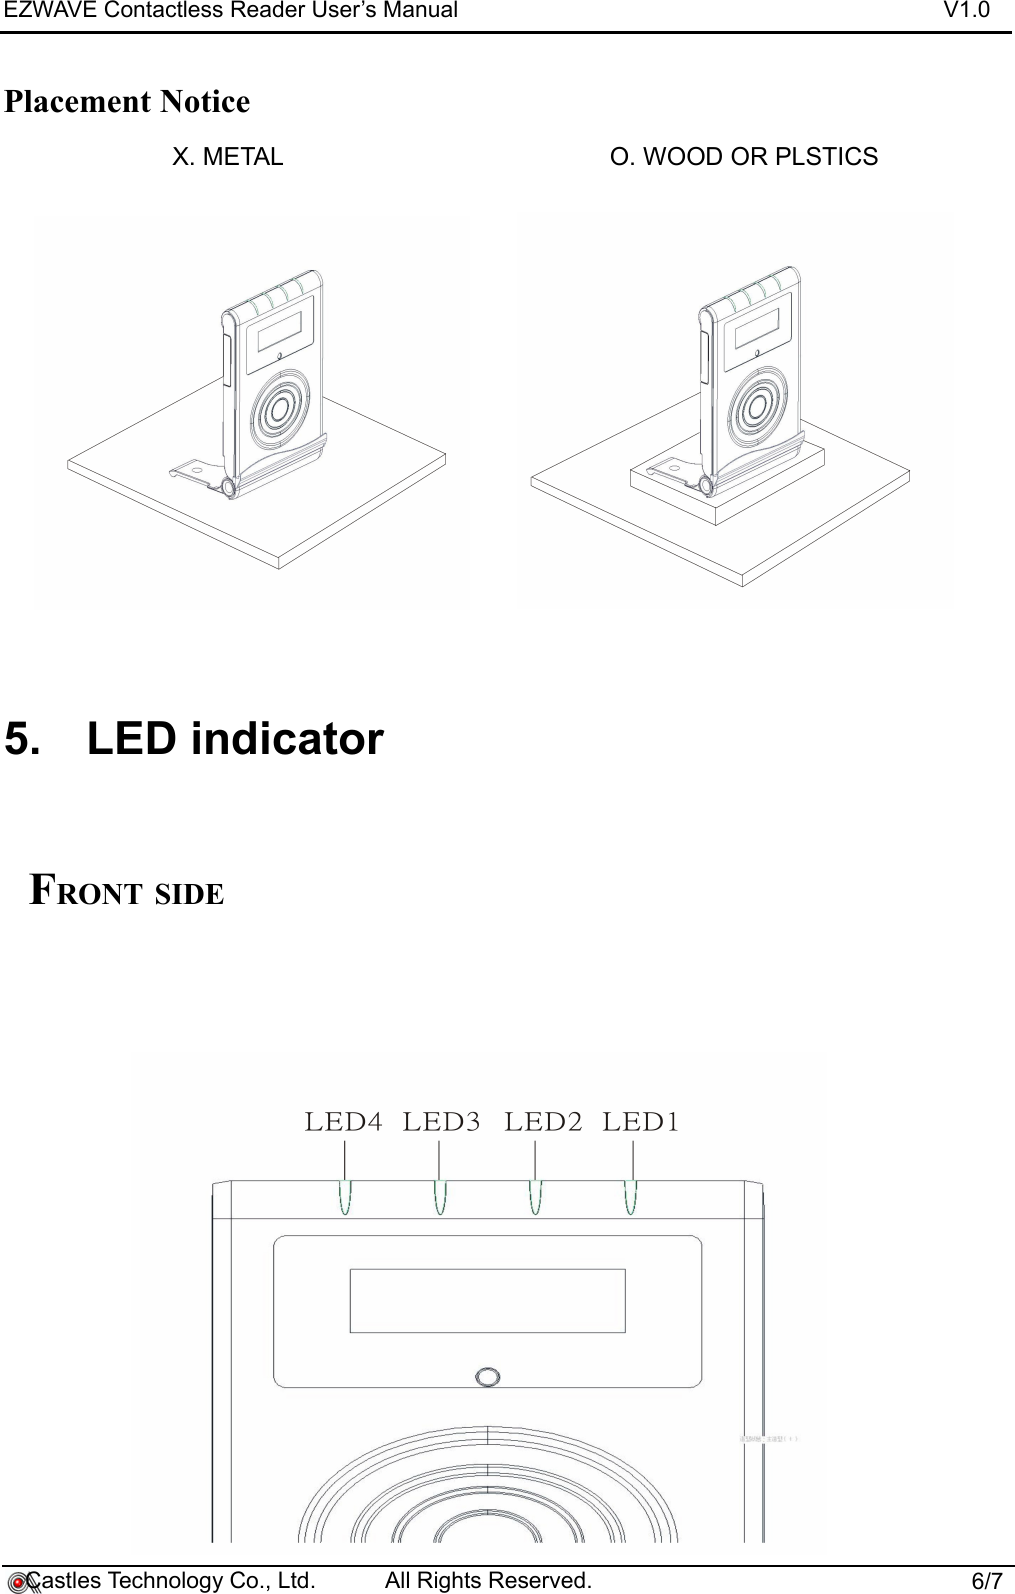 EZWAVE Contactless Reader User’s Manual V1.0Placement Notice                         X. METAL                                               O. WOOD OR PLSTICS5. LED indicatorFRONT SIDE    Castles Technology Co., Ltd.           All Rights Reserved.                          6/7